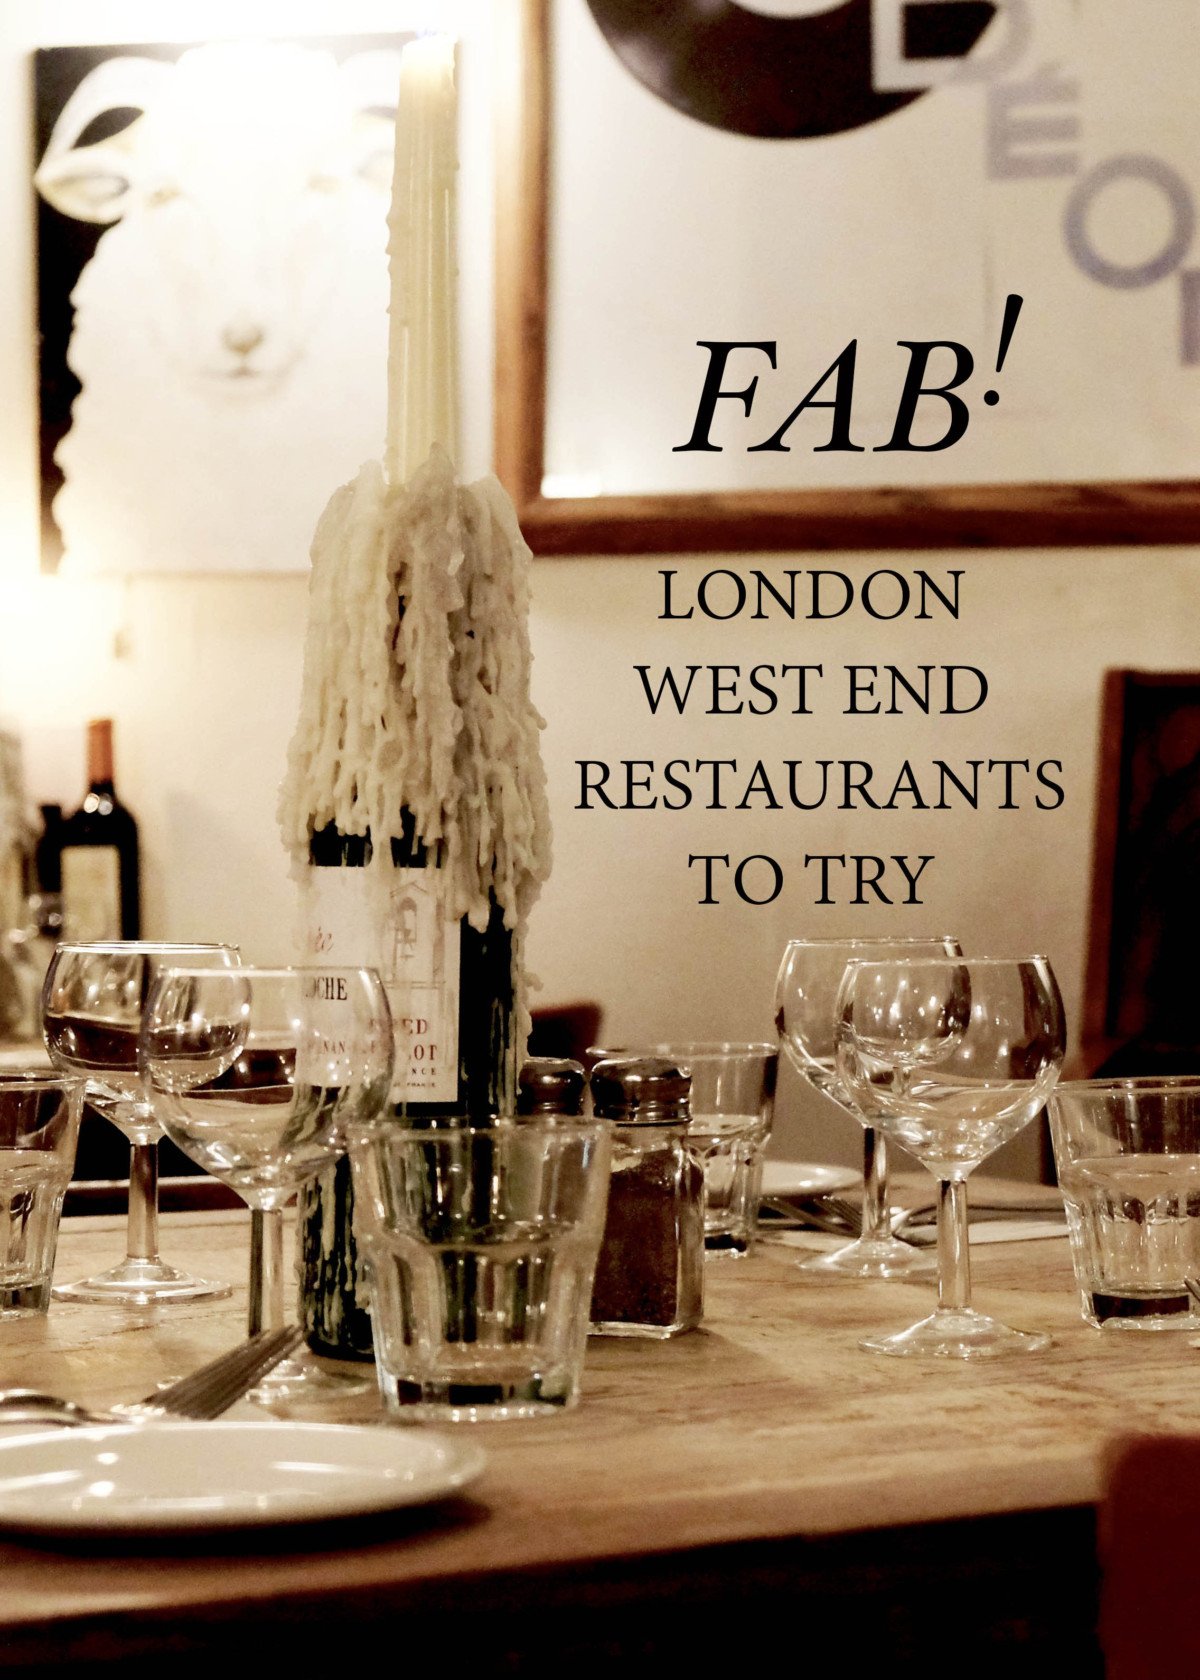 Fab London restaurants to try.